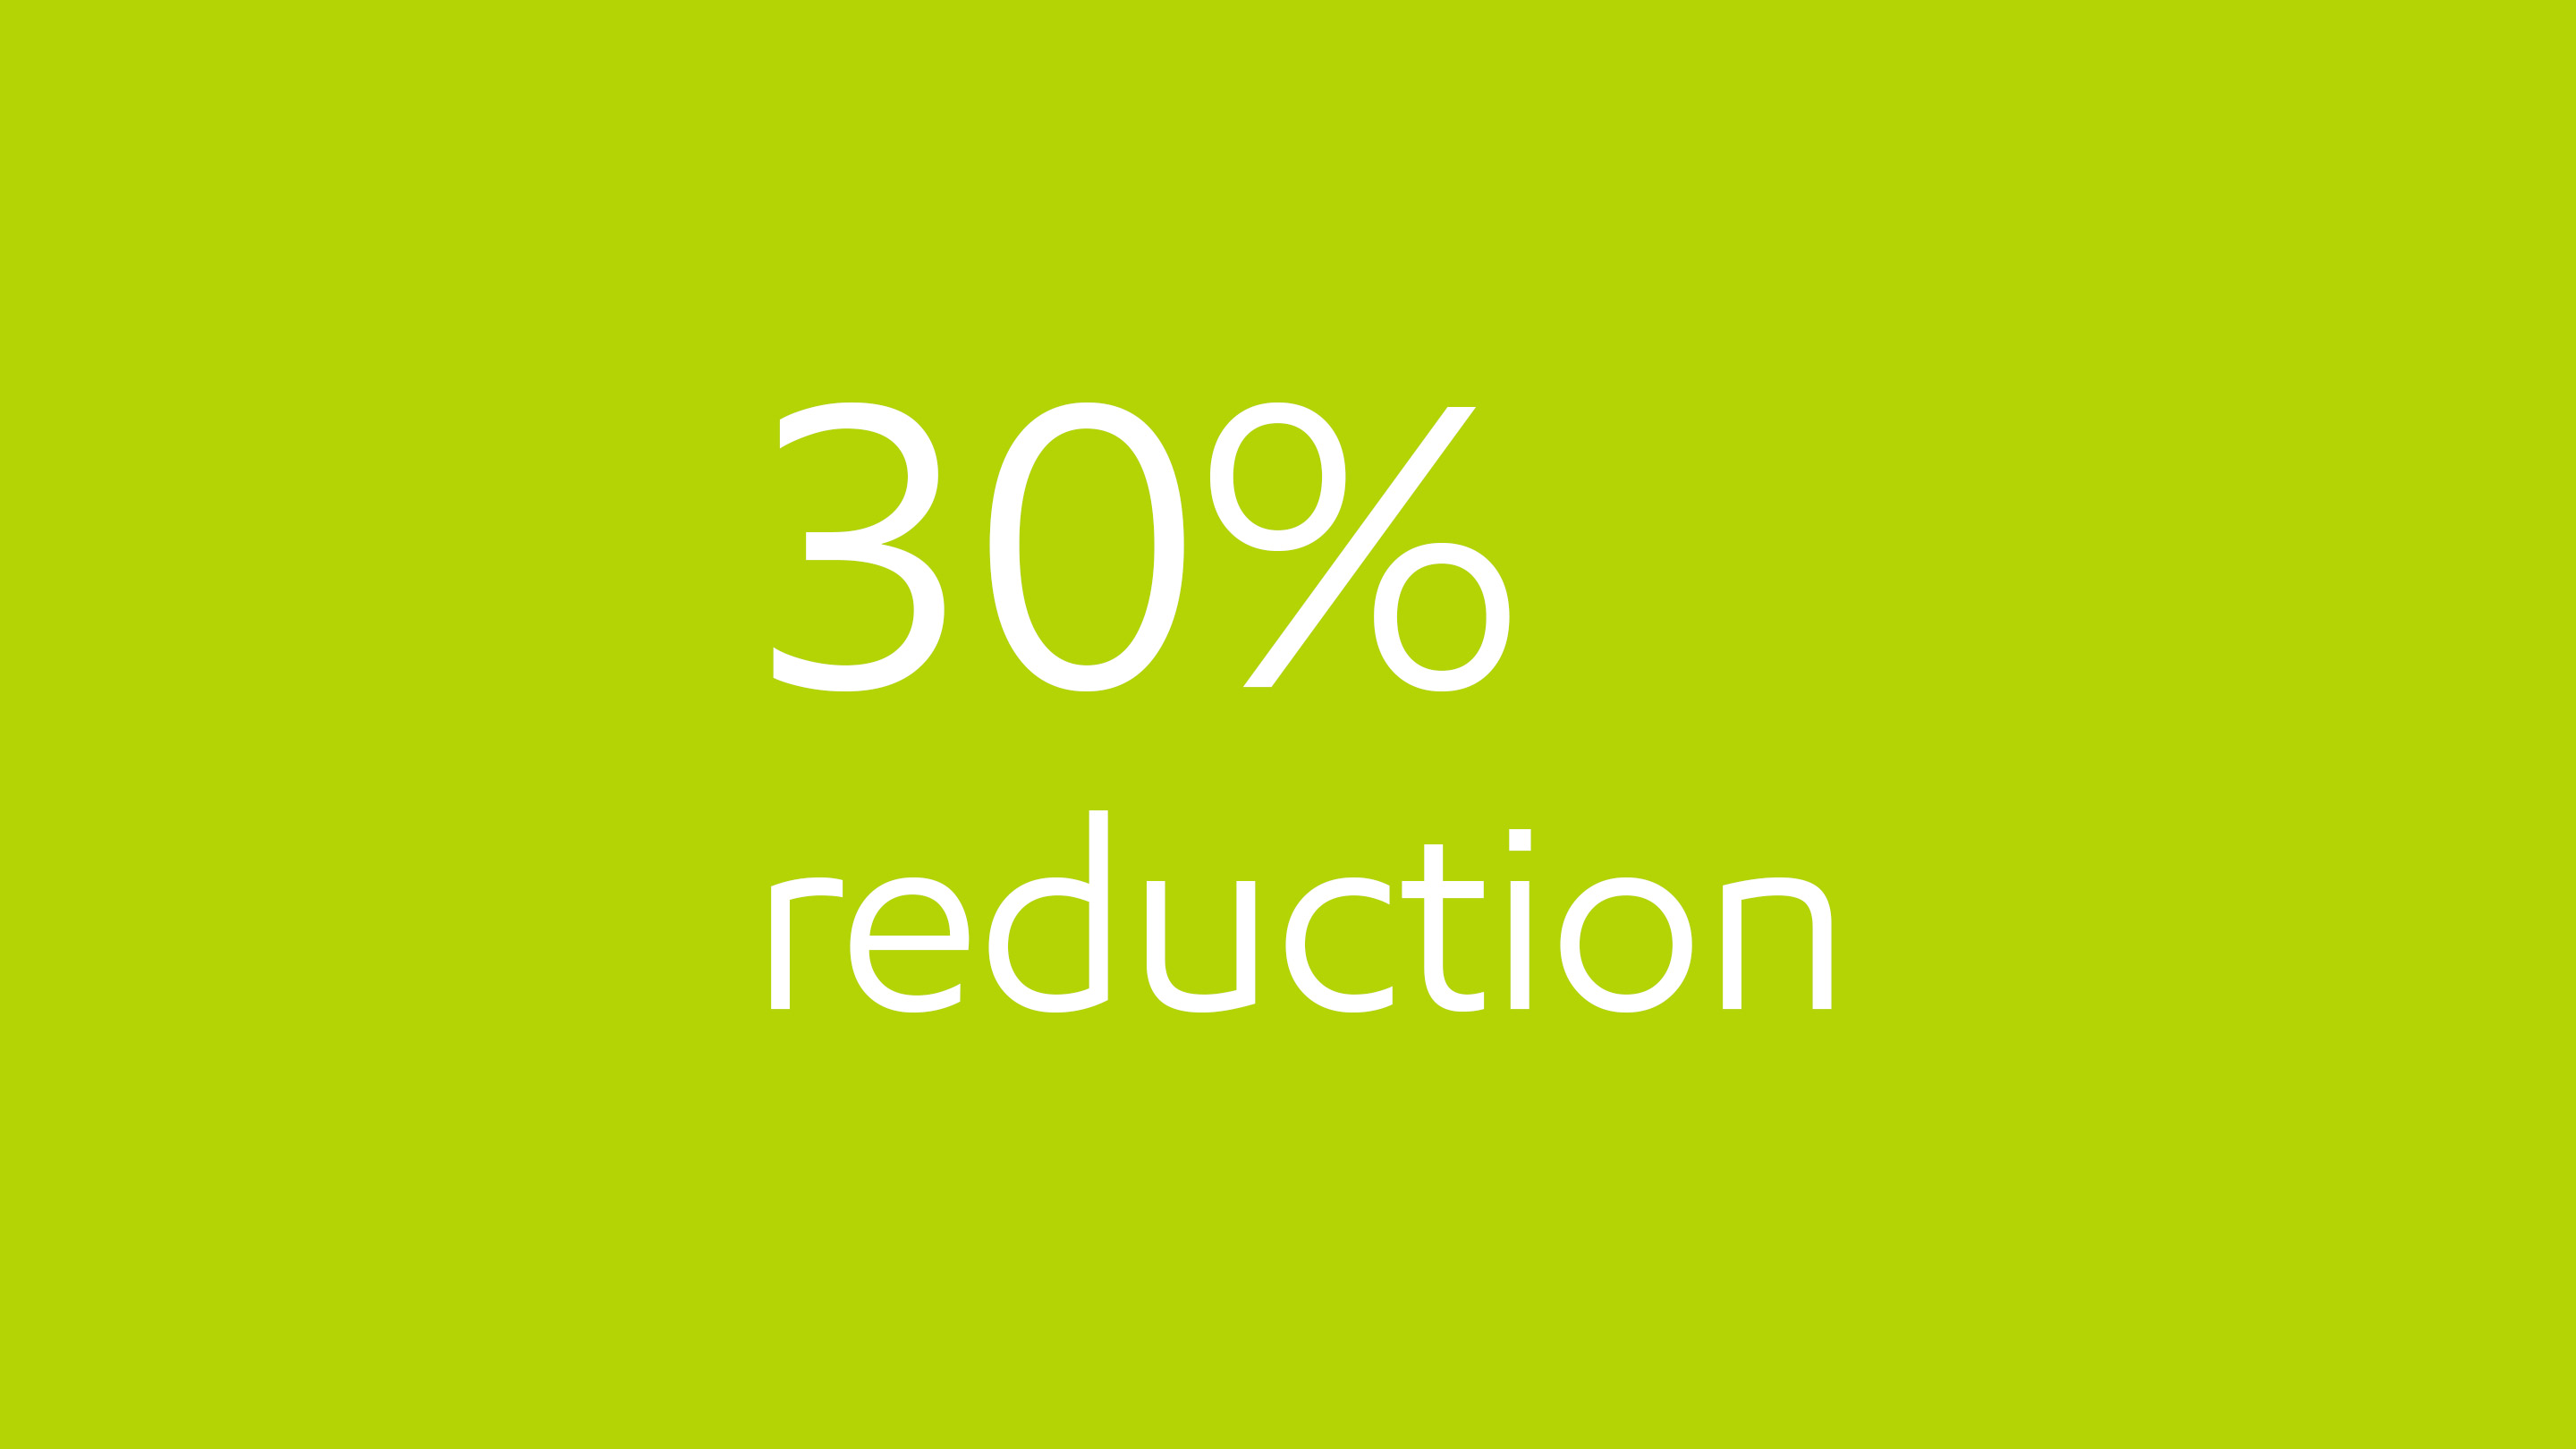 graphic of 30% reduction